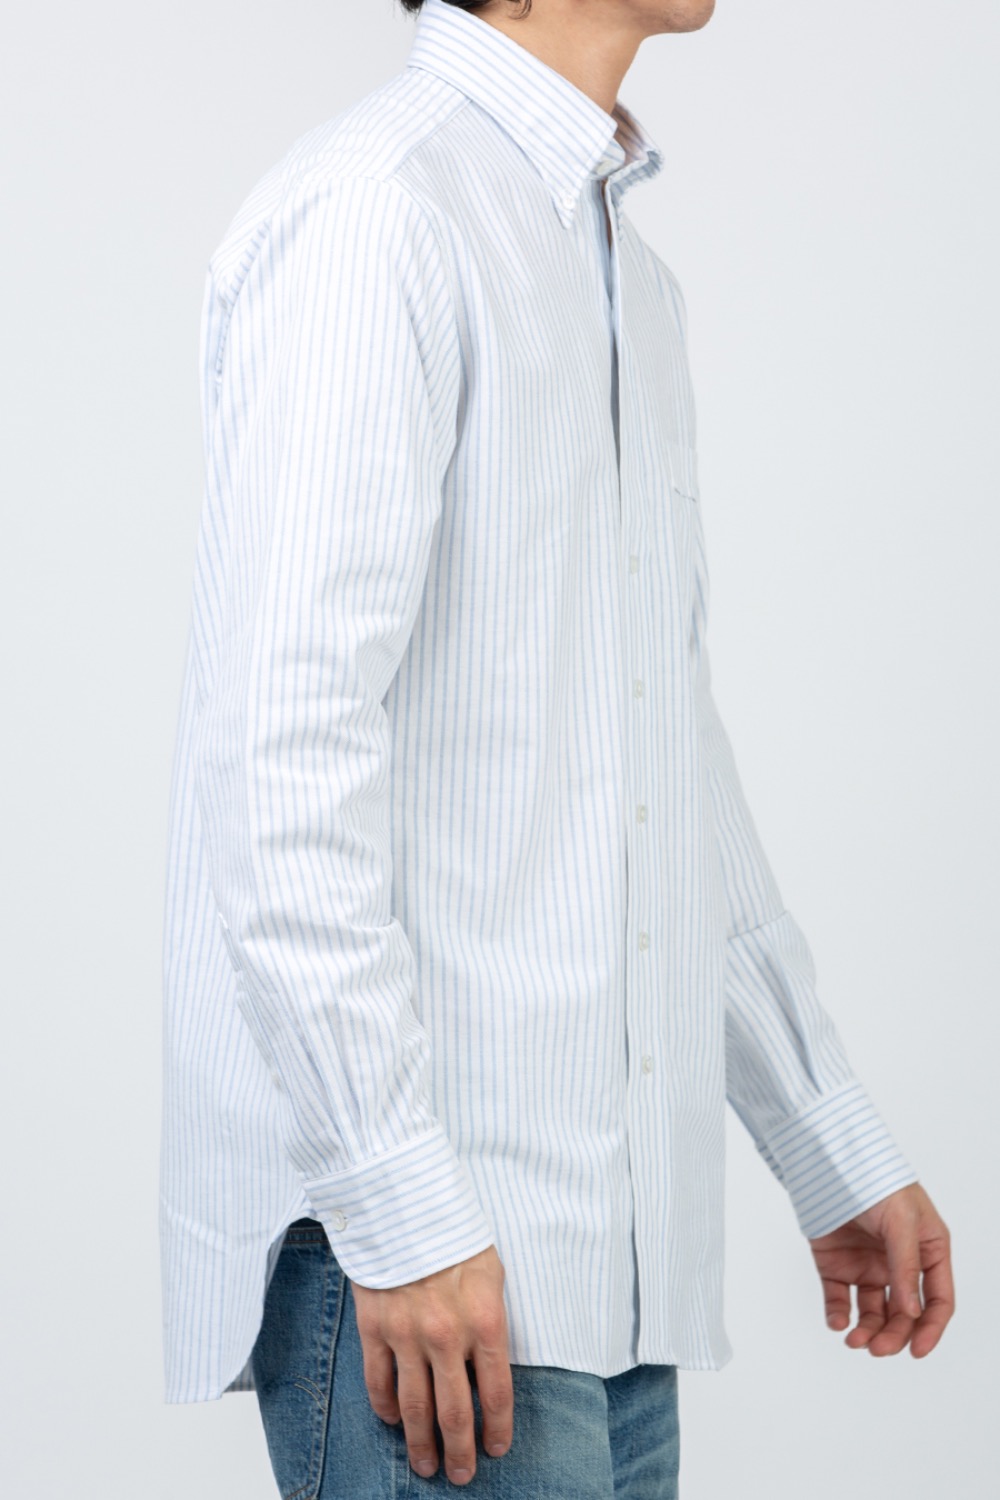 (CARRY OVER) WHITE AND BLUE PENCIL STRIPE COTTON OXFORD CLOTH BUTTON-DOWN SHIRT